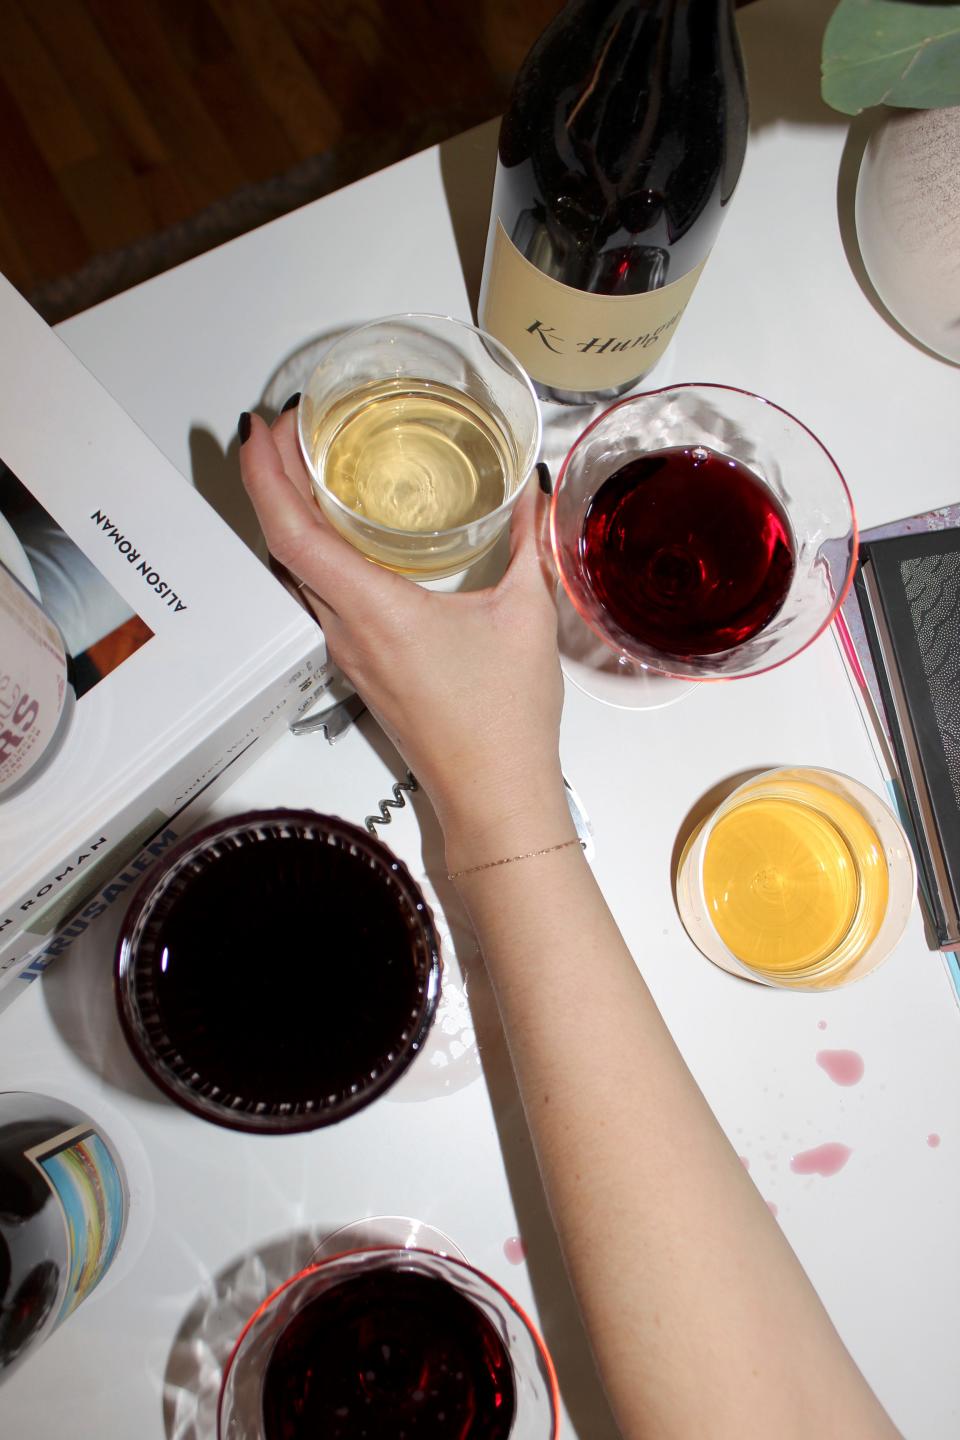 Choosing the right wine starts with knowing your audience.